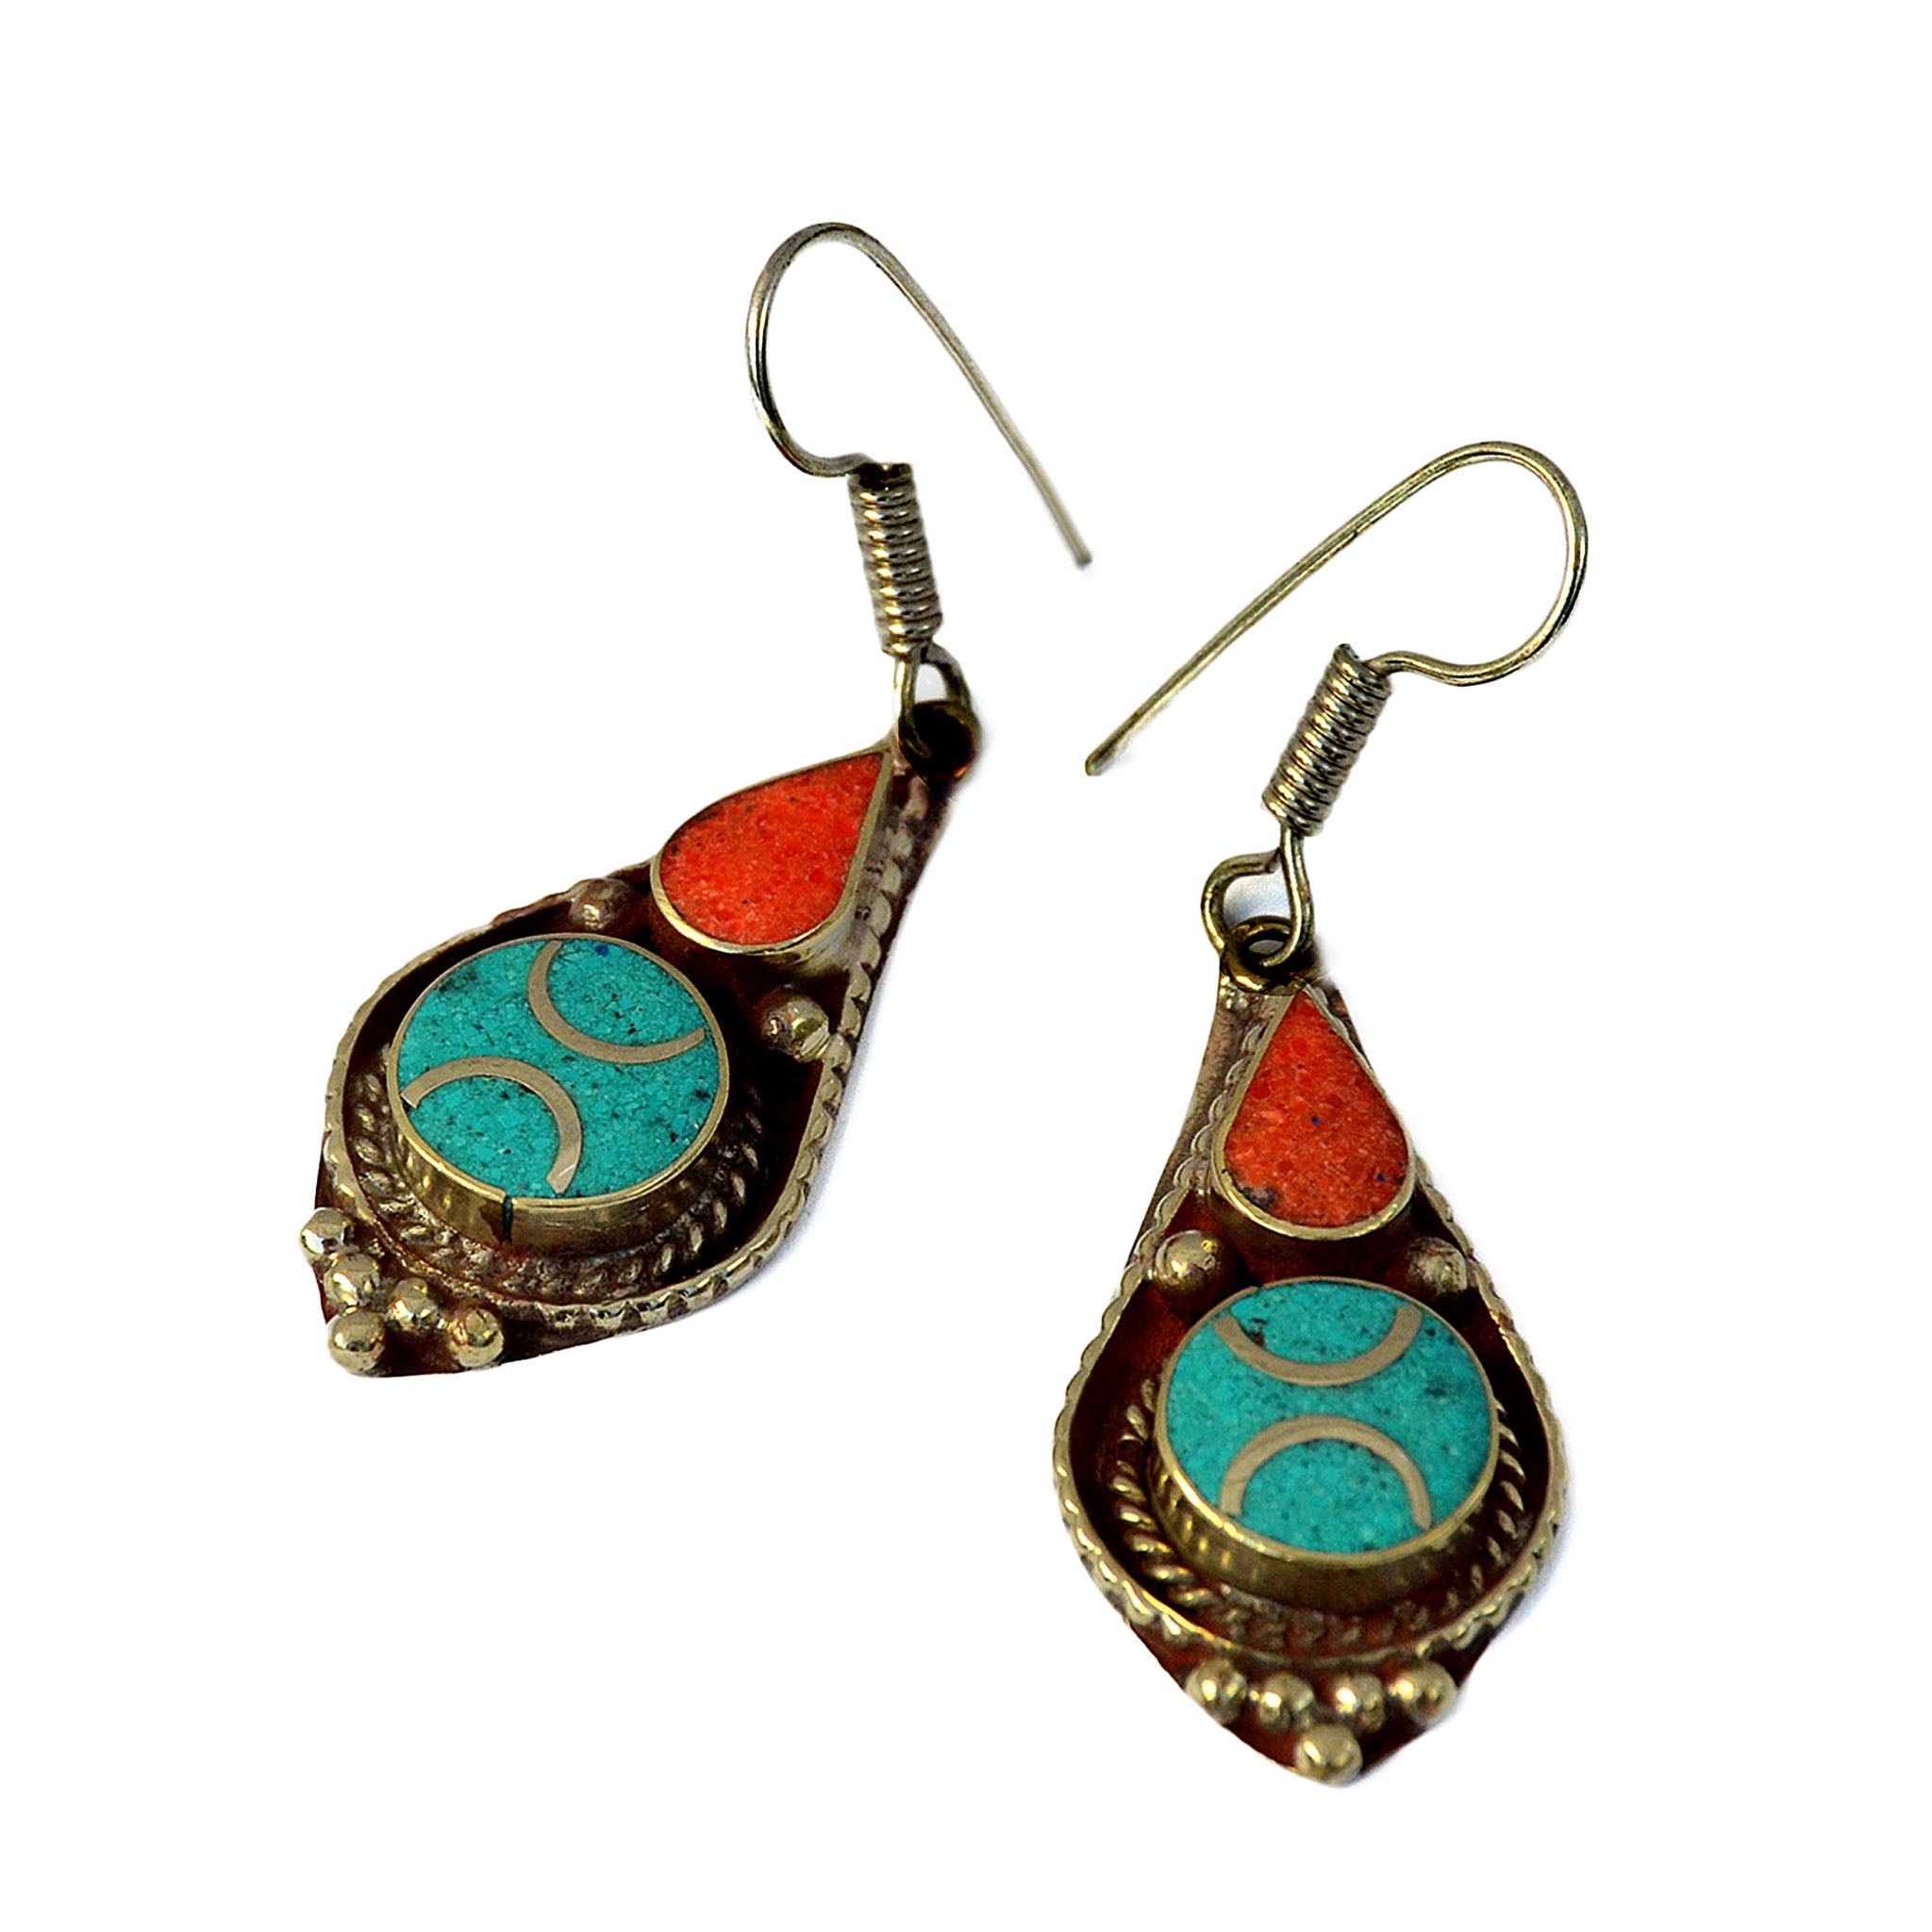 Ethnic tibetan drop earrings with inlay turquoise and red coral stones